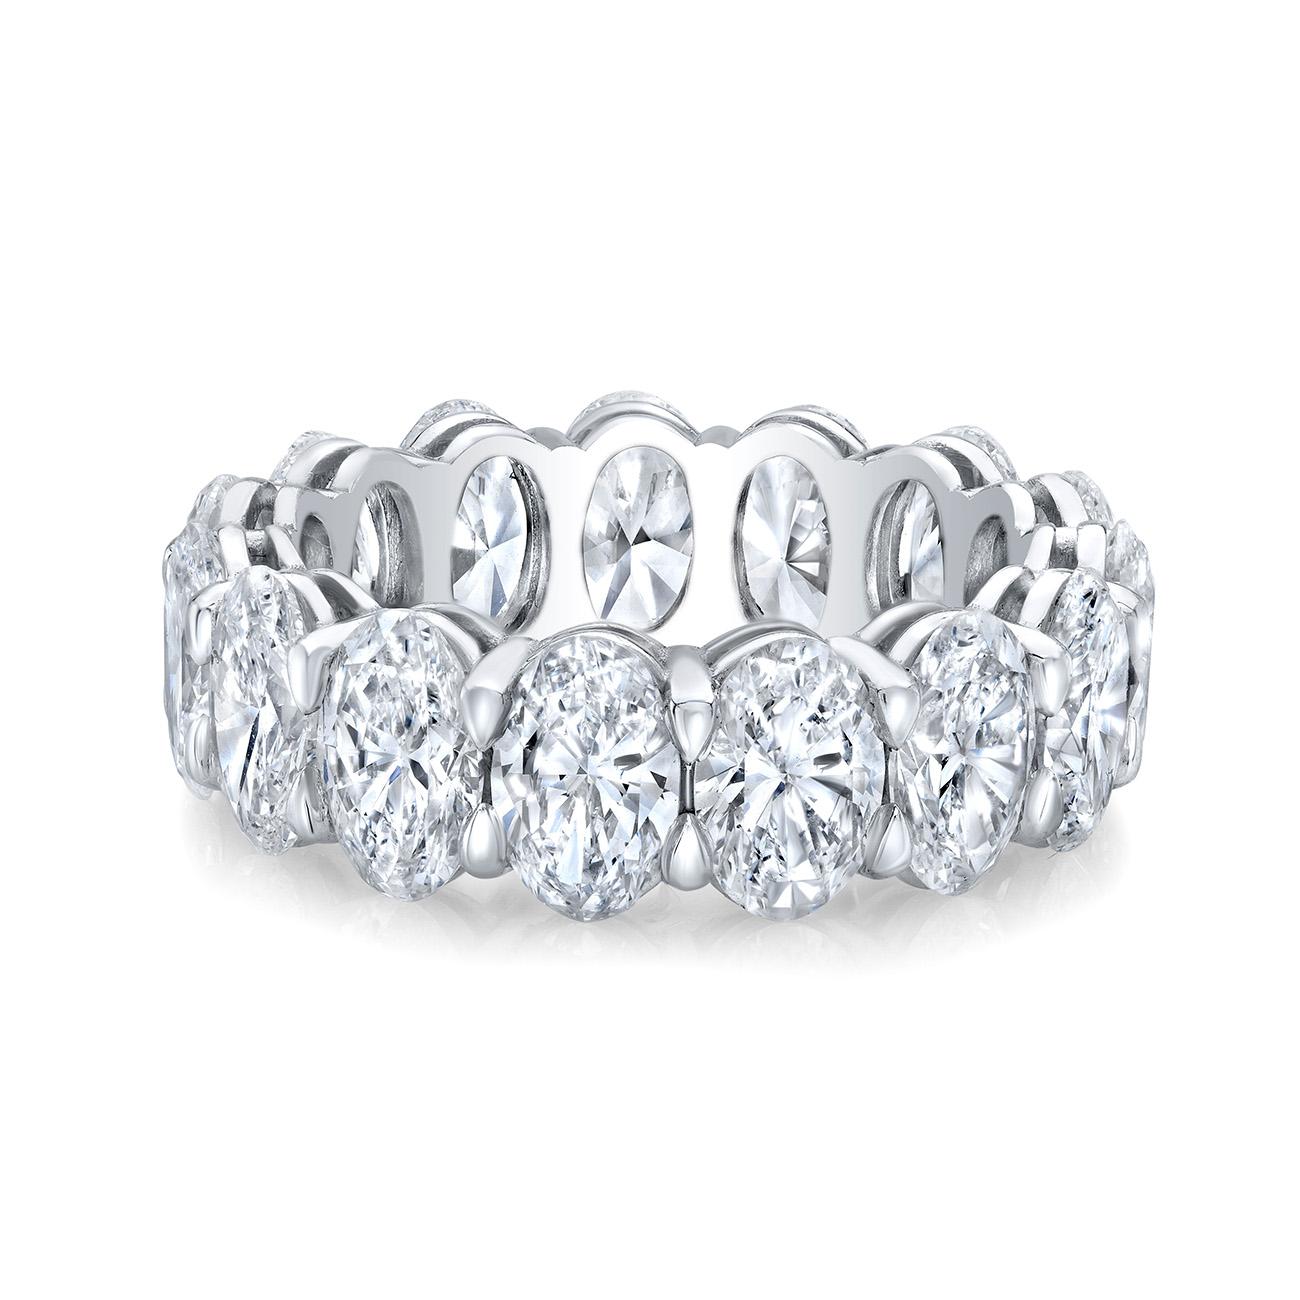 Women's Eternity Band in Platinum with Oval Cut Diamonds. D4.37ct.t.w. For Sale